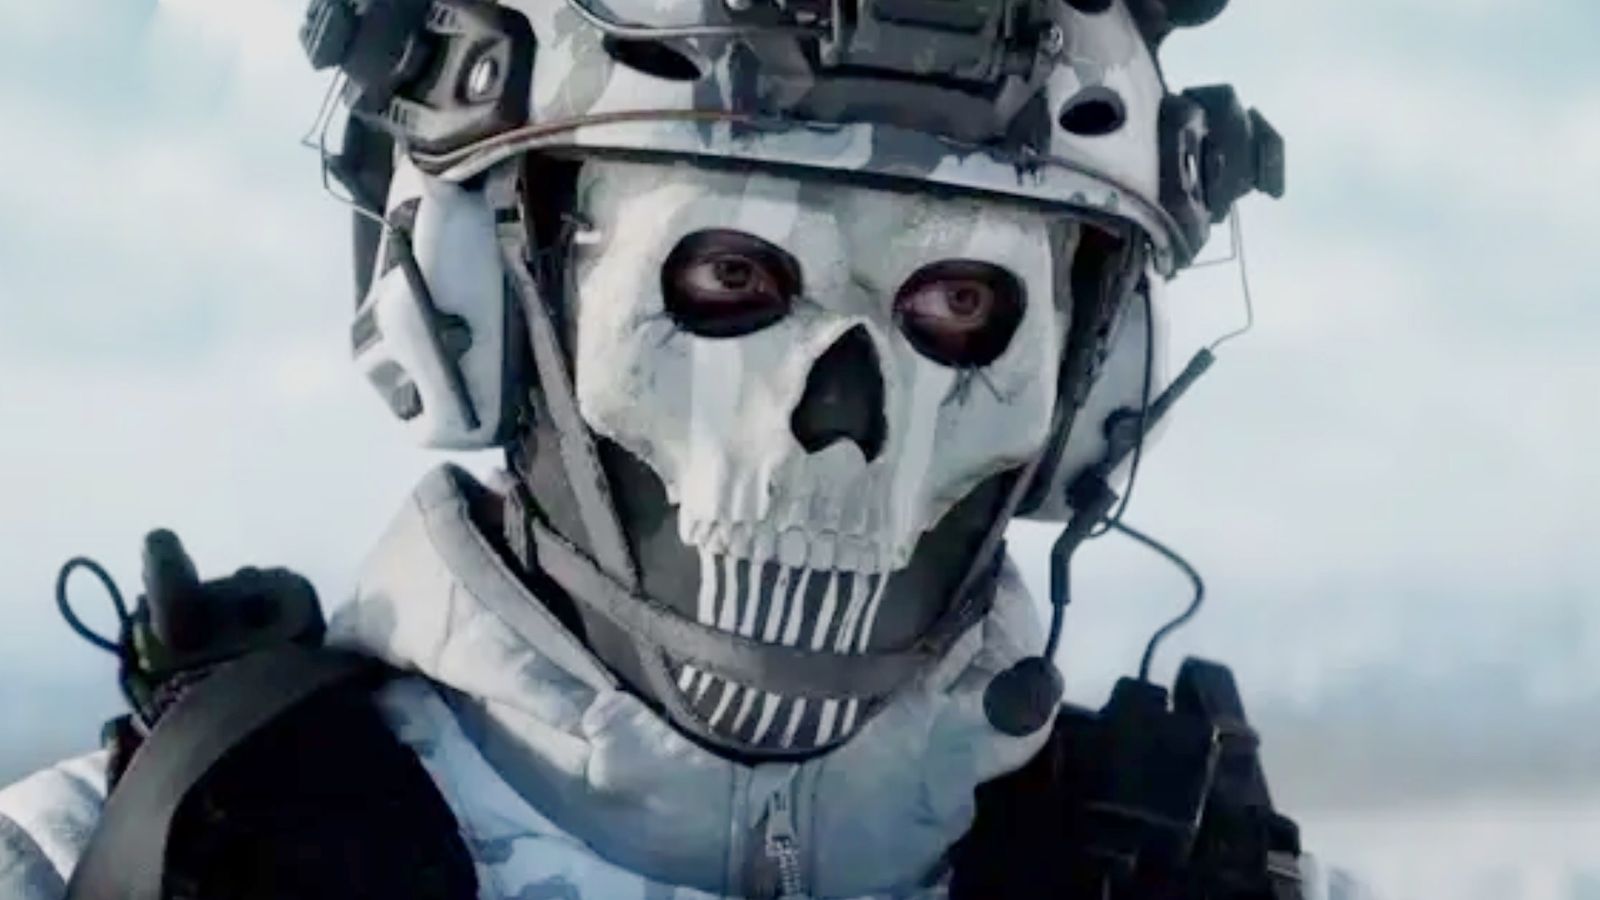 A close-up of Ghost from Modern Warfare 3